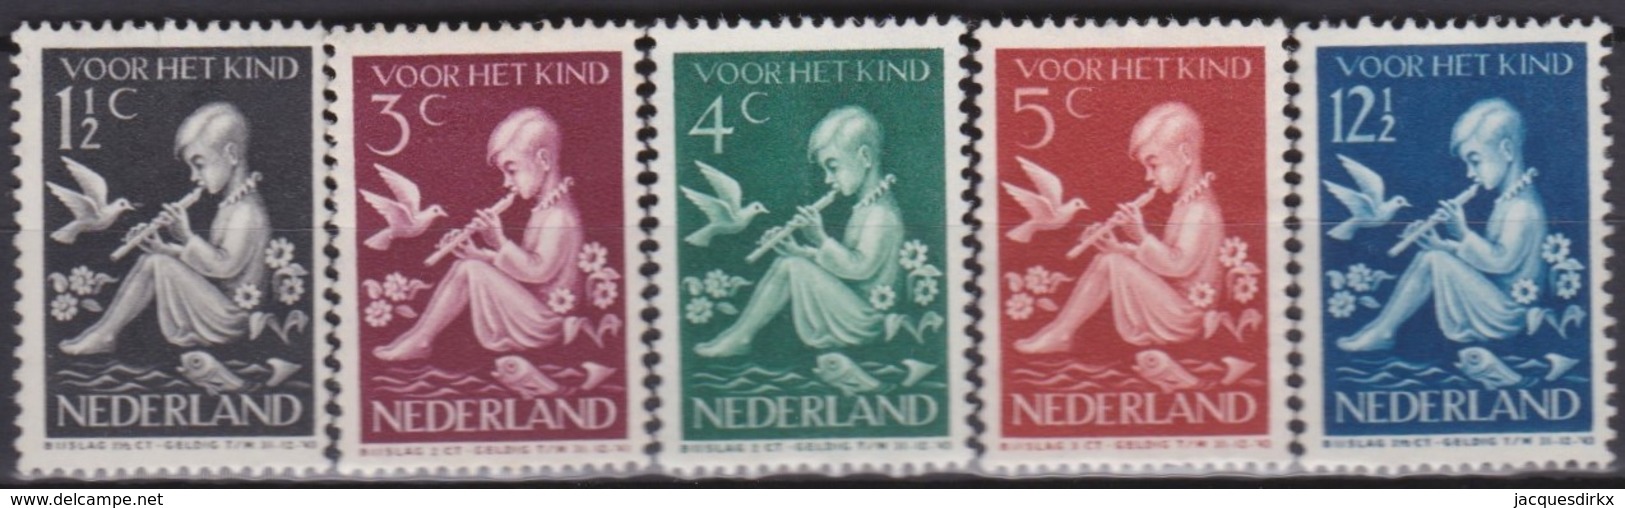 Pays-Bas    .     Yvert    .    312/316      .      **      .      Neuf SANS Charniere     .   /   .  MNH - Unused Stamps